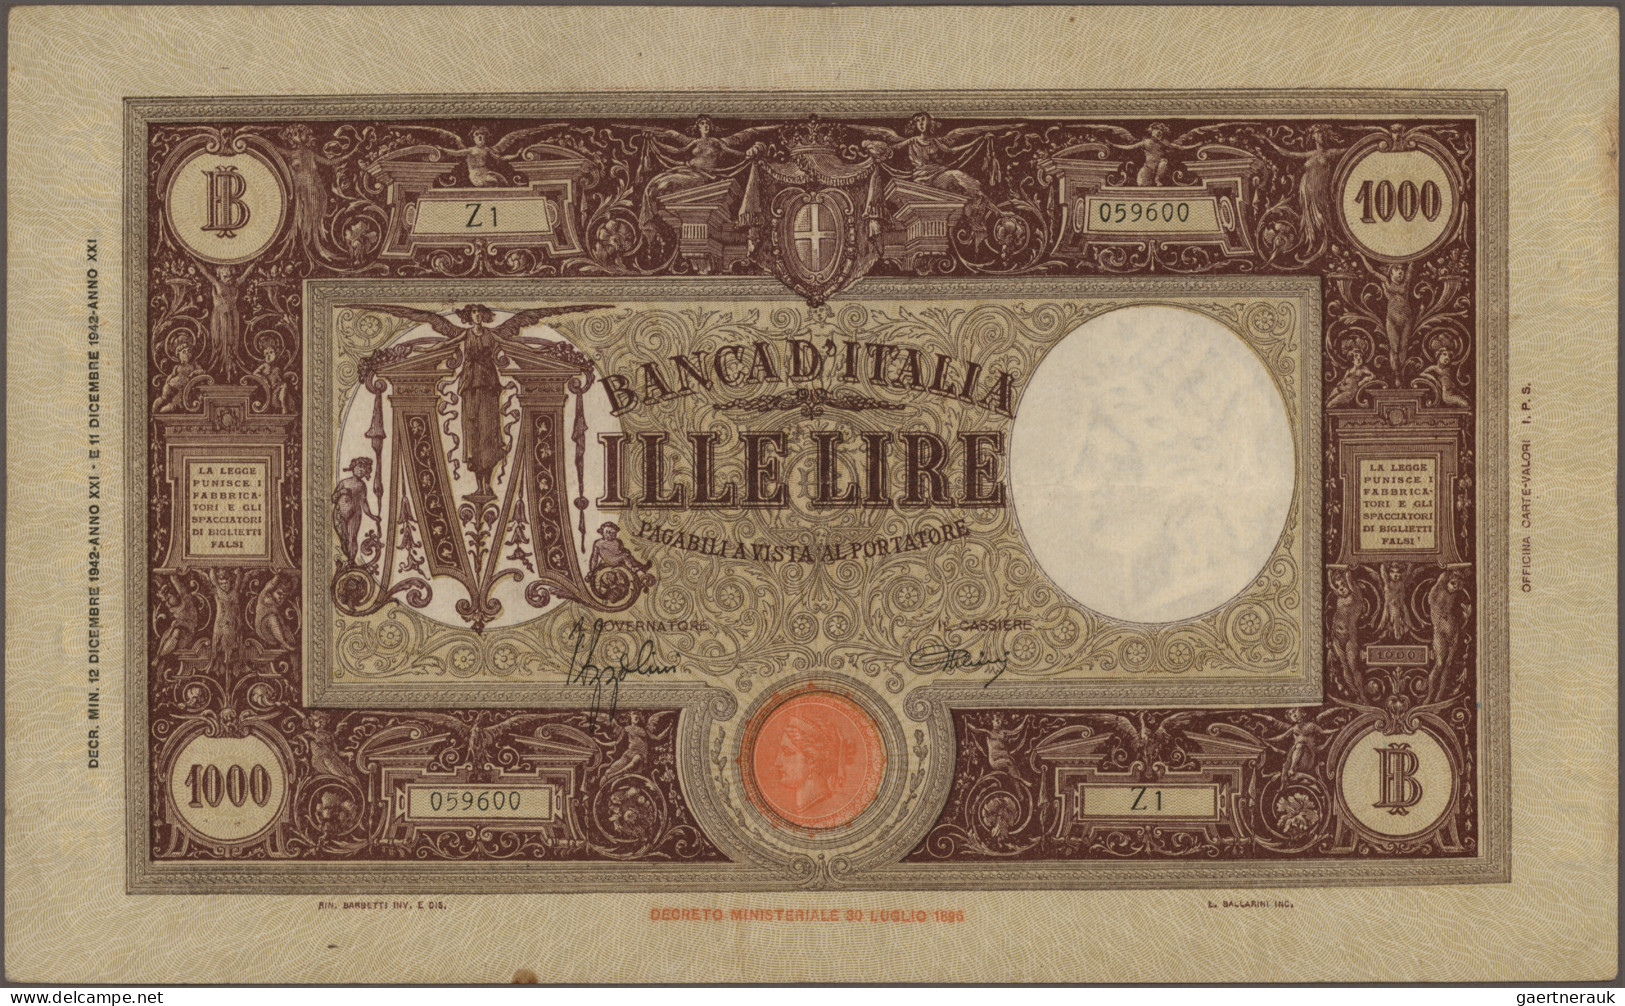 Italy: Banca d'Italia, Allied Military Currency and State & Treasury Notes, gian